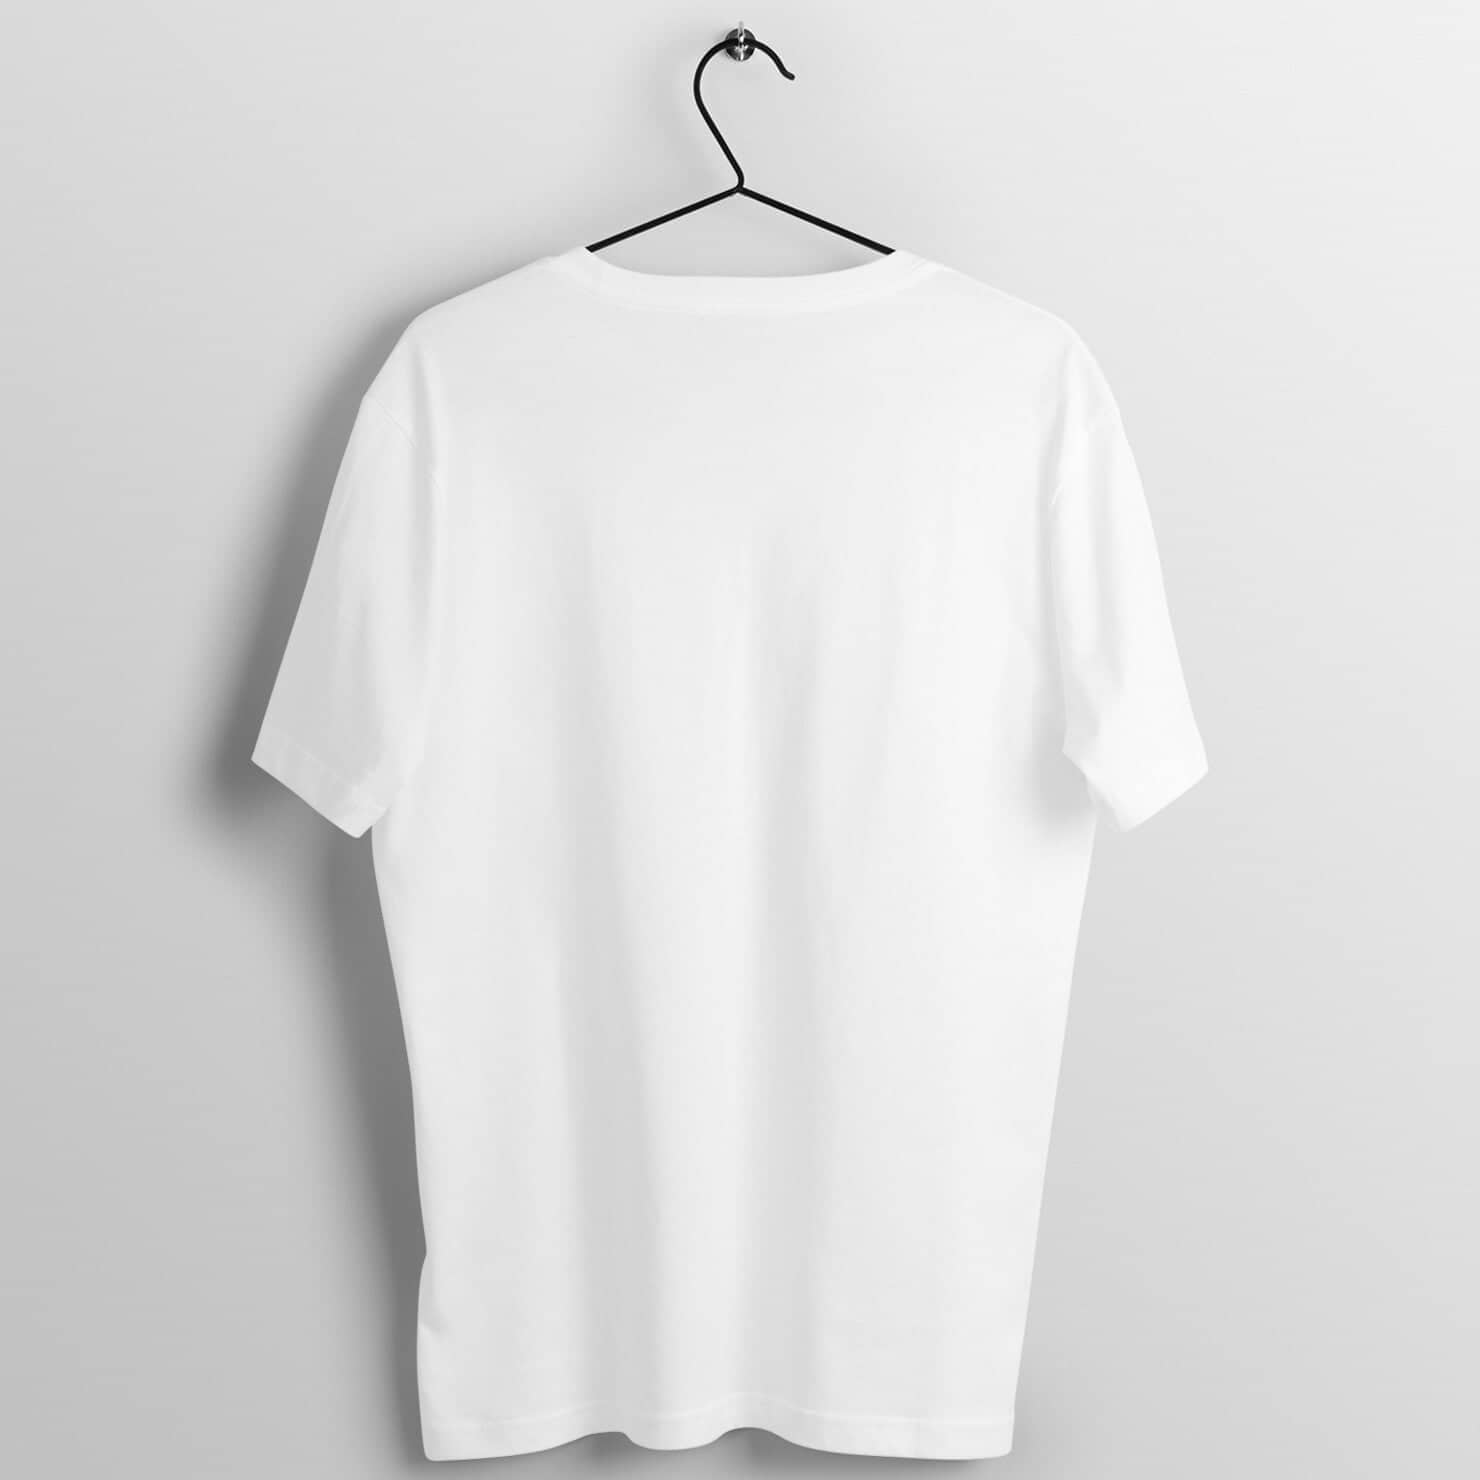 Wait What Special White T Shirt for Men and Women Shirts & Tops Printrove 